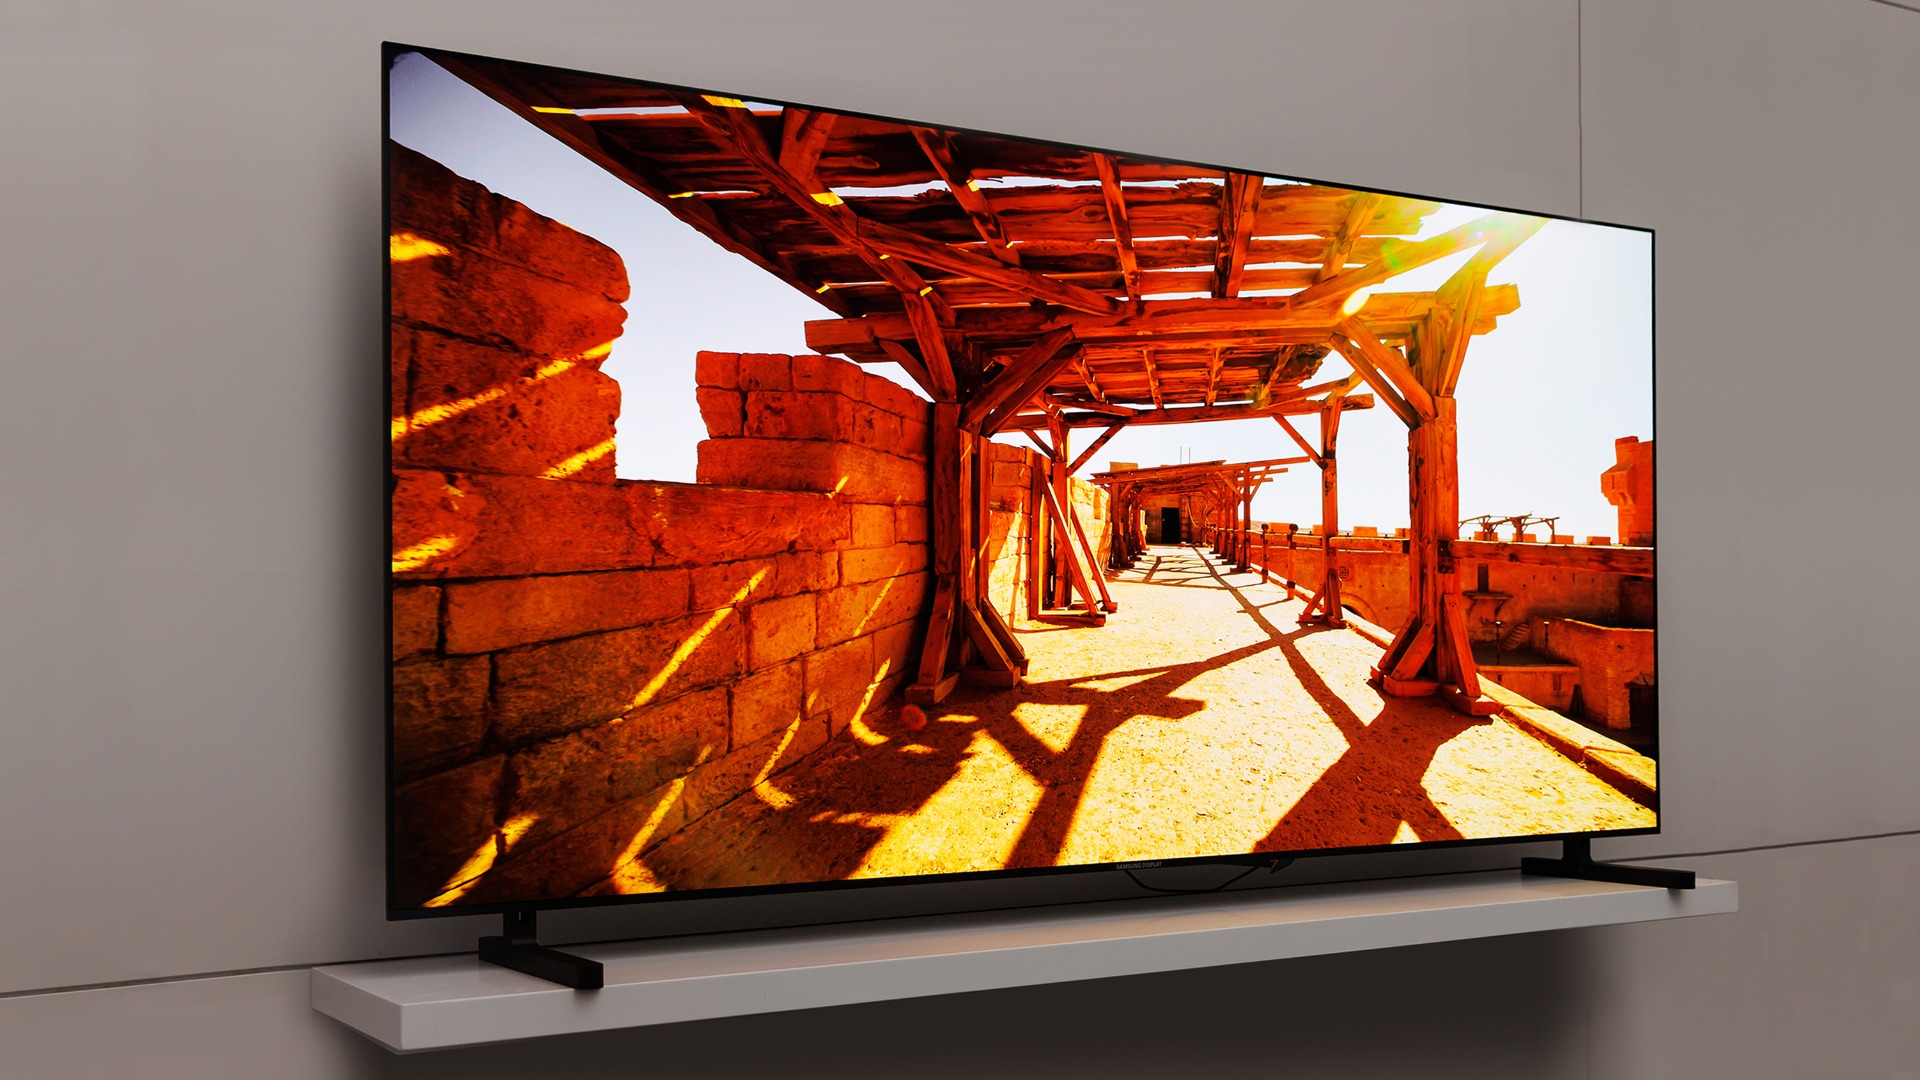 Samsung Expands QD-OLED Series Of TVs With New Budget Lineup